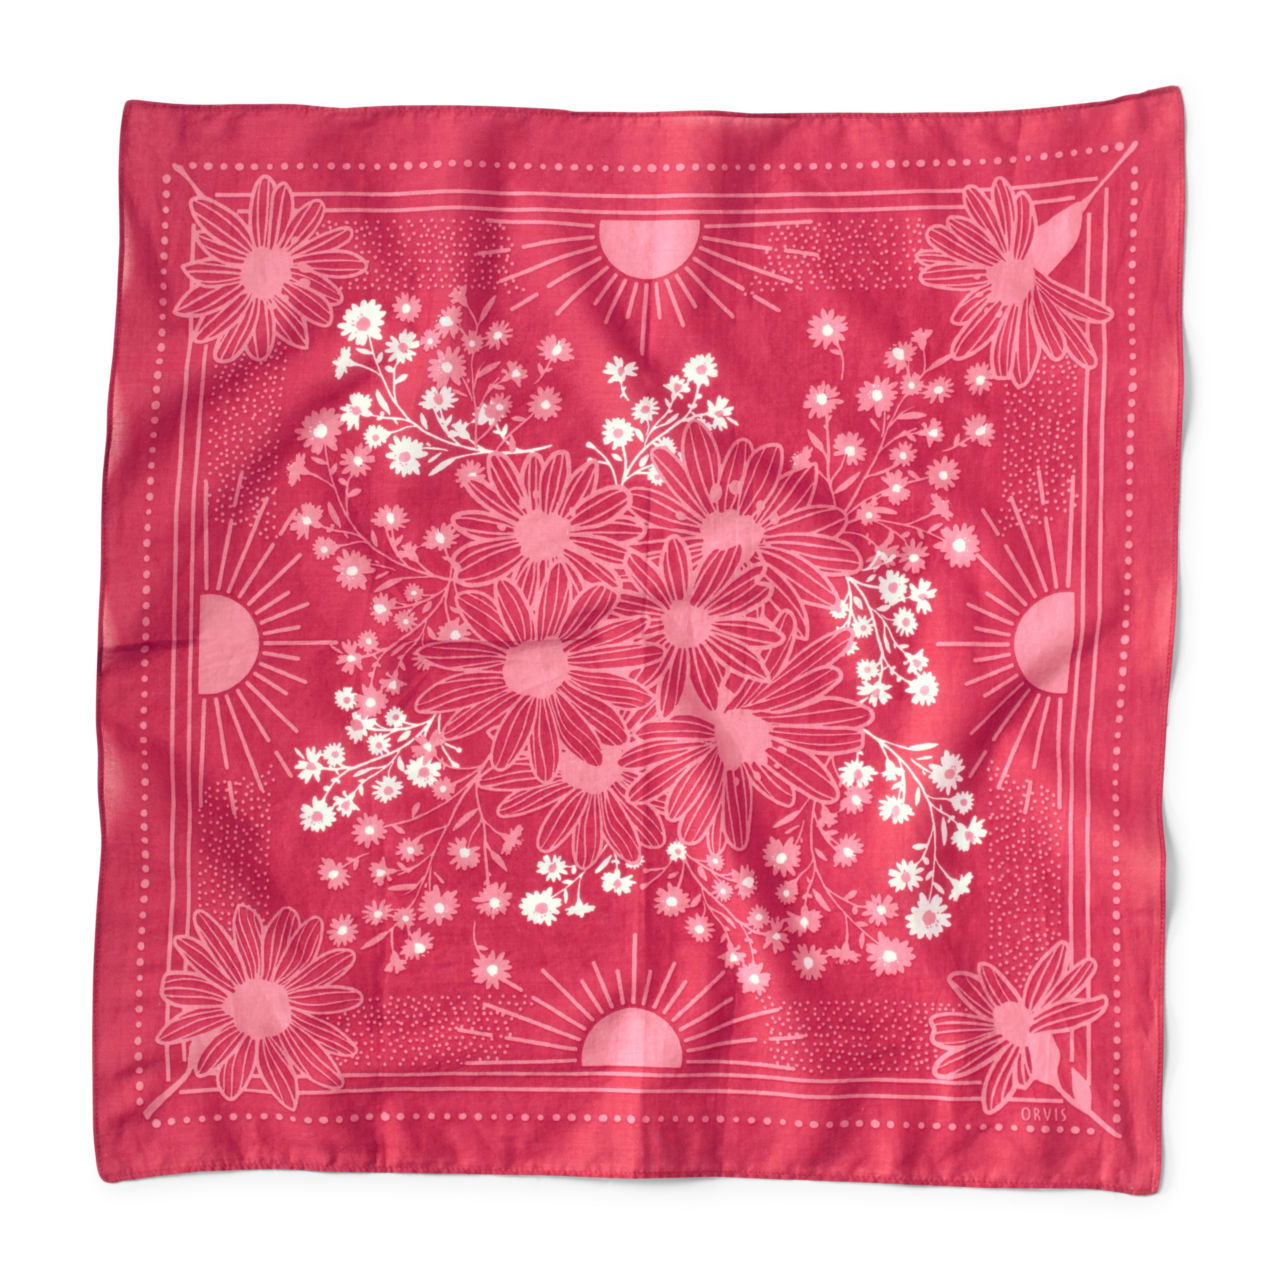 Signature Printed Bandana - FADED RED FLOATING DAISY image number 0